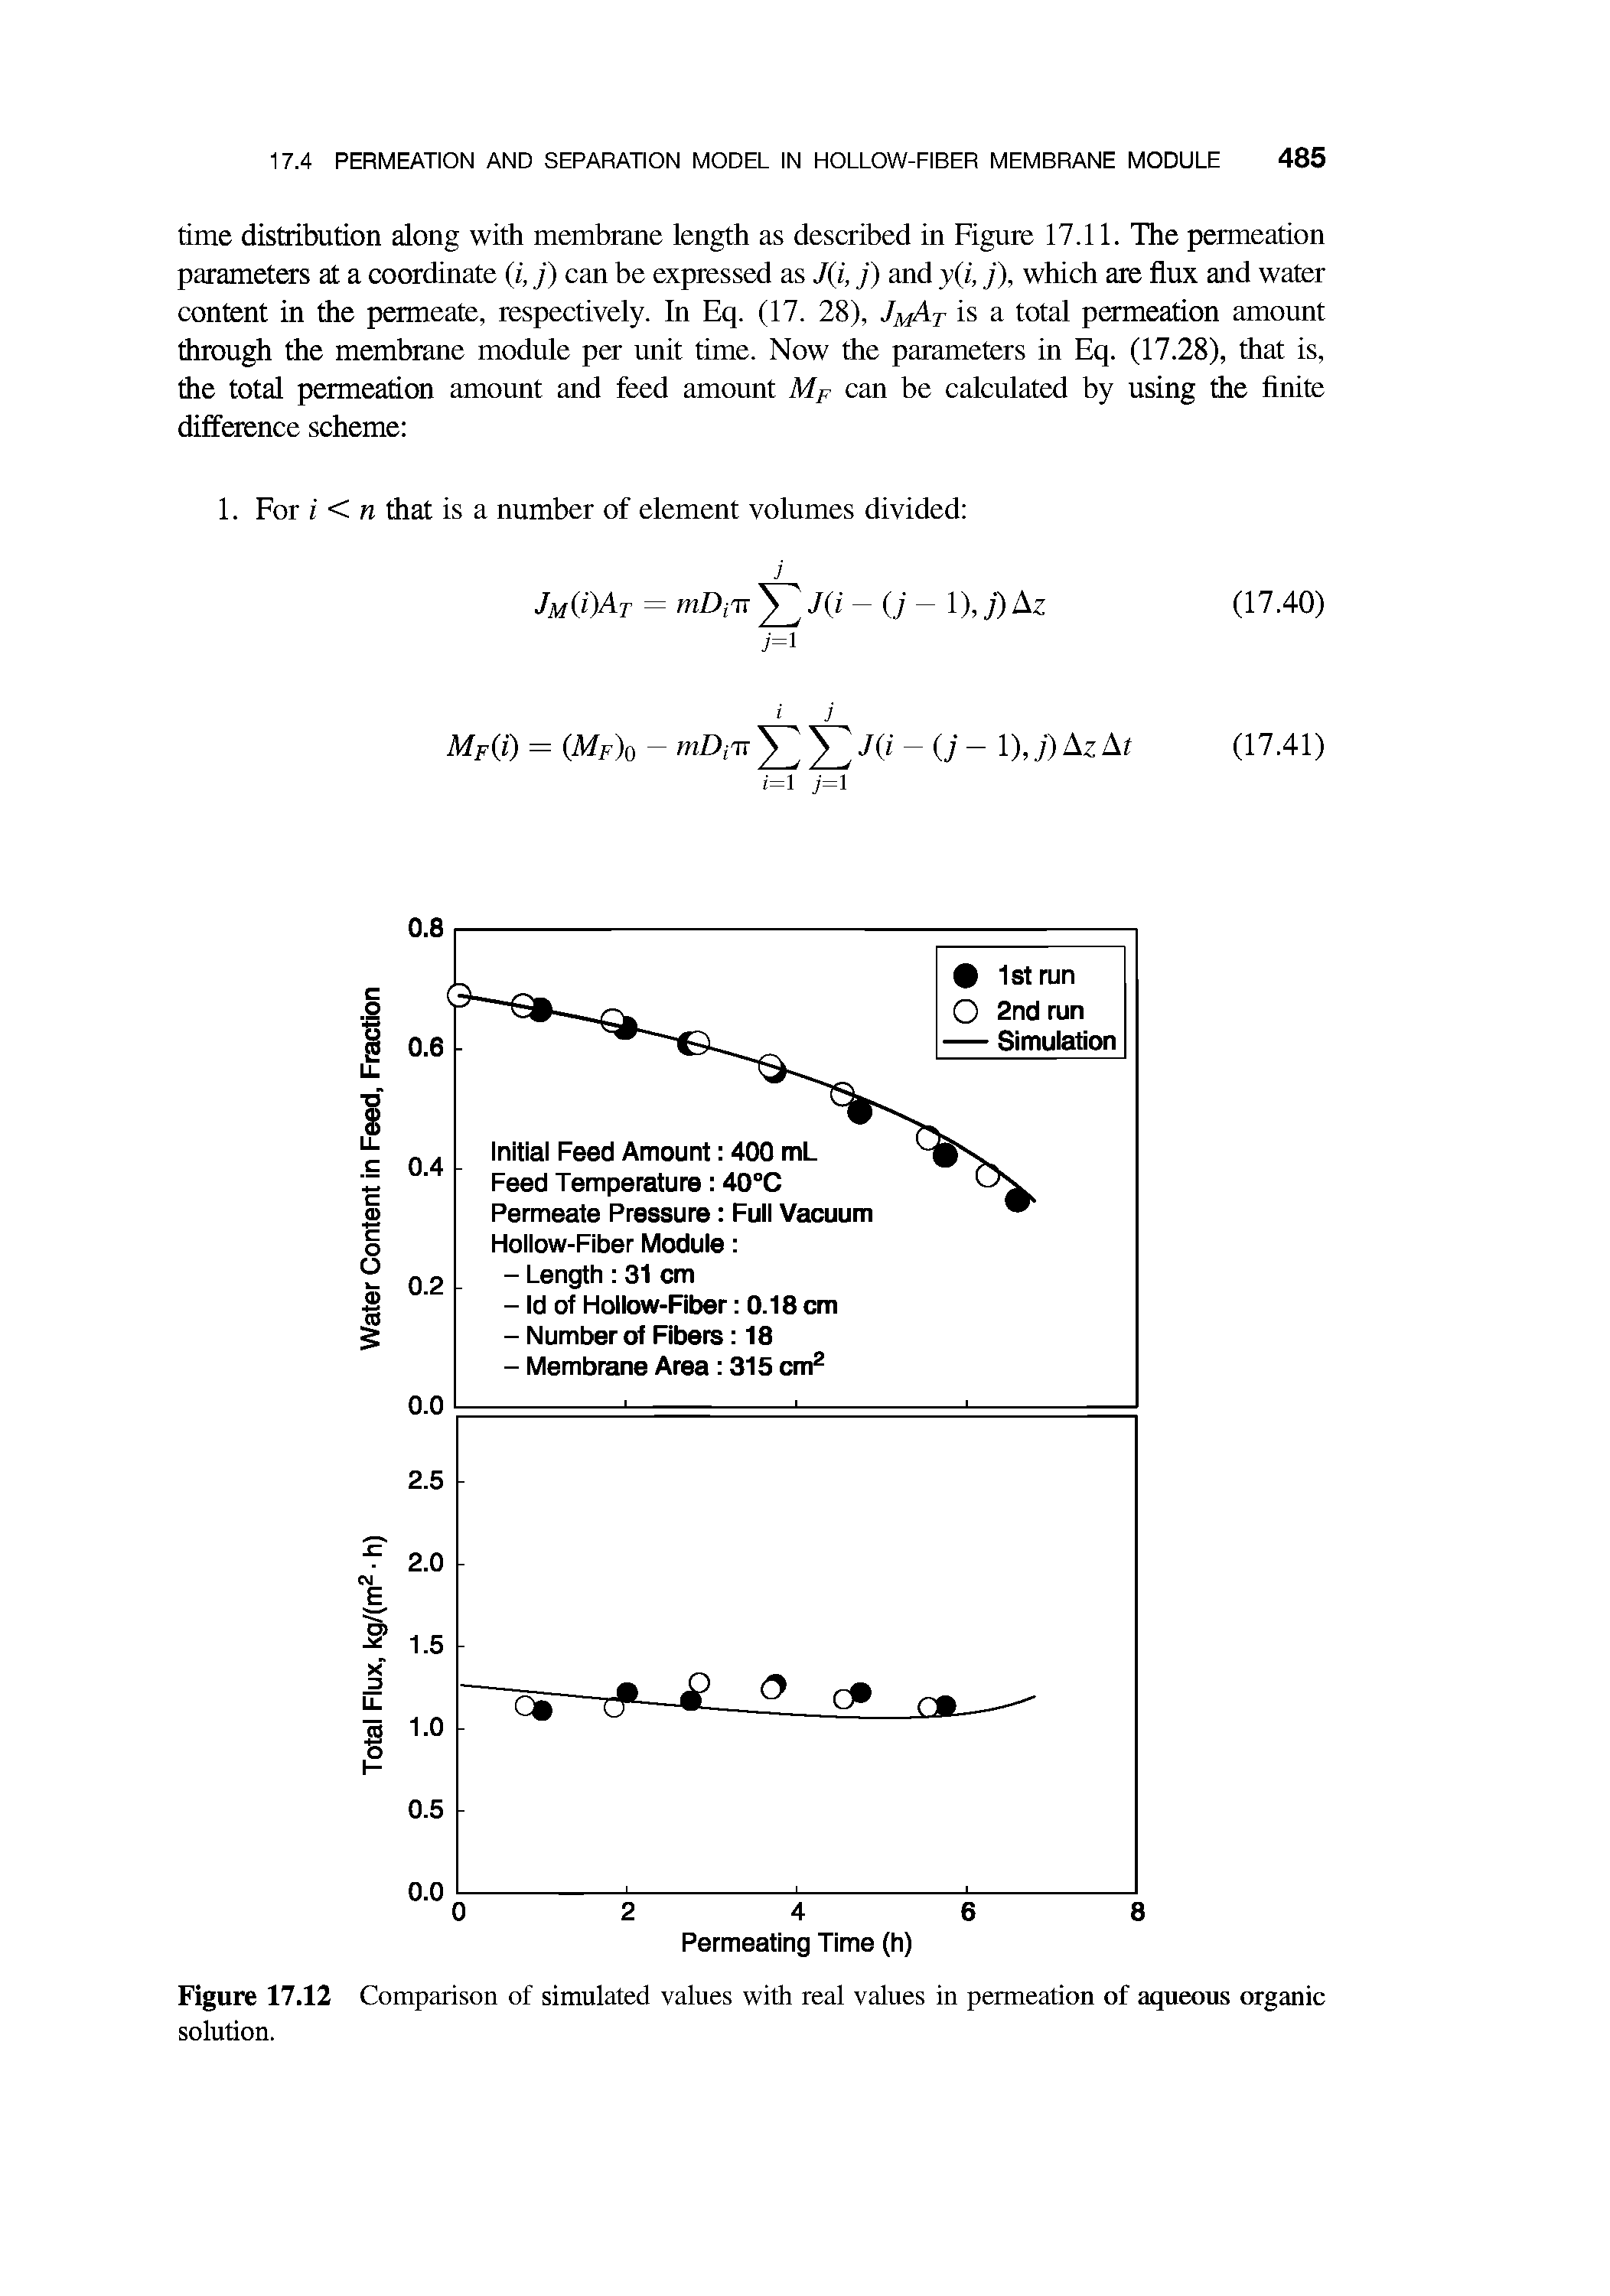 Figure 17.12 Comparison of simulated values with real values in permeation of aqueous organic solution.